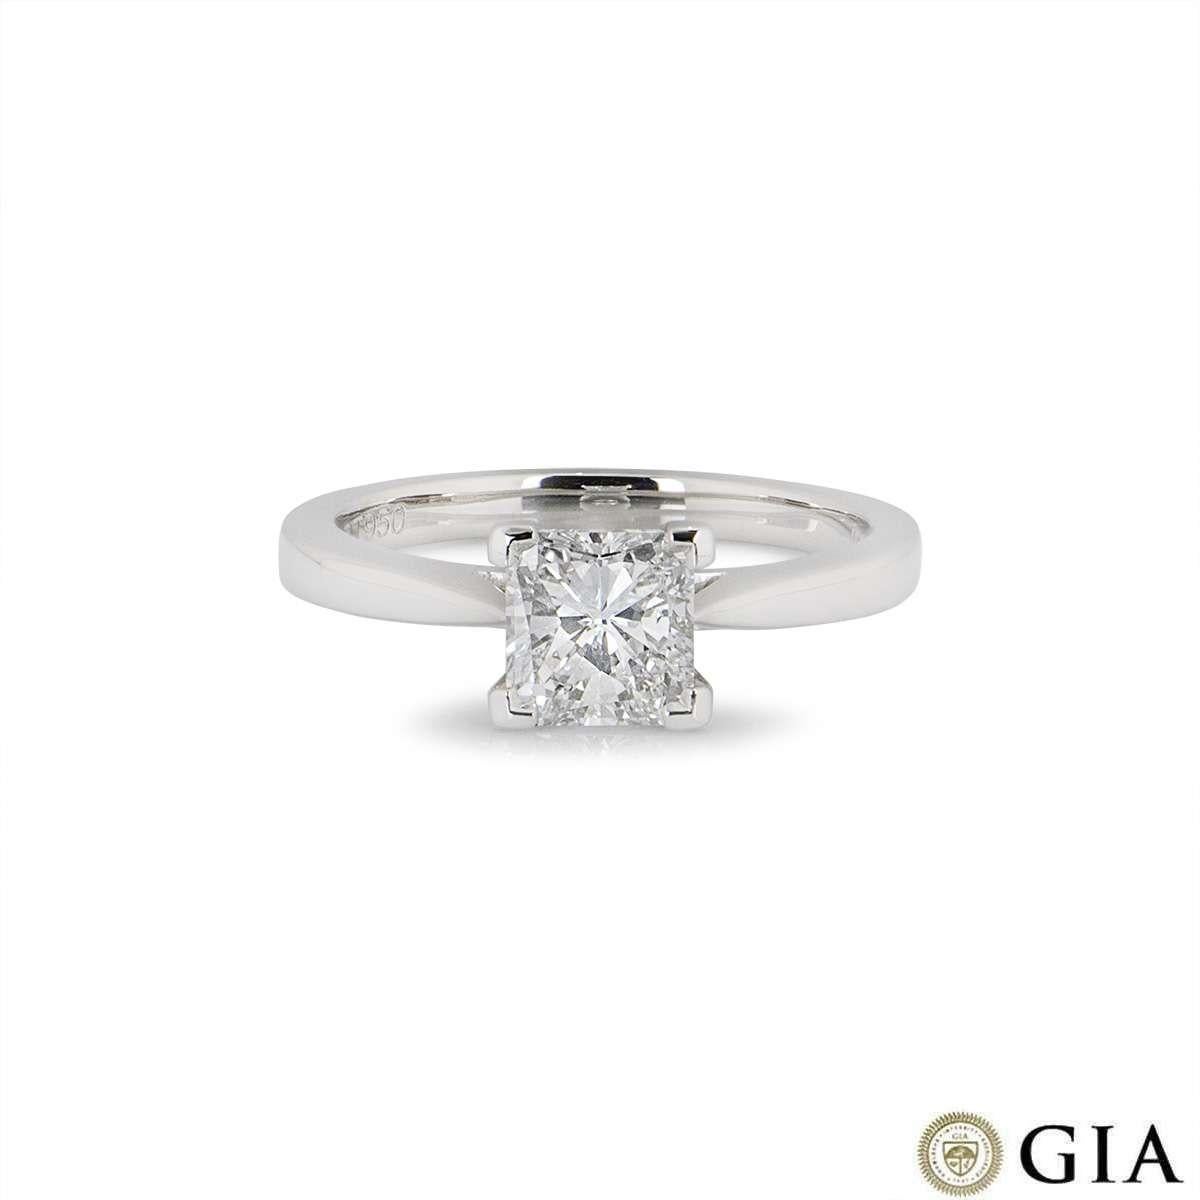 GIA Certified Platinum Radiant Cut Diamond Ring 1.03ct F/VS1 In New Condition For Sale In London, GB